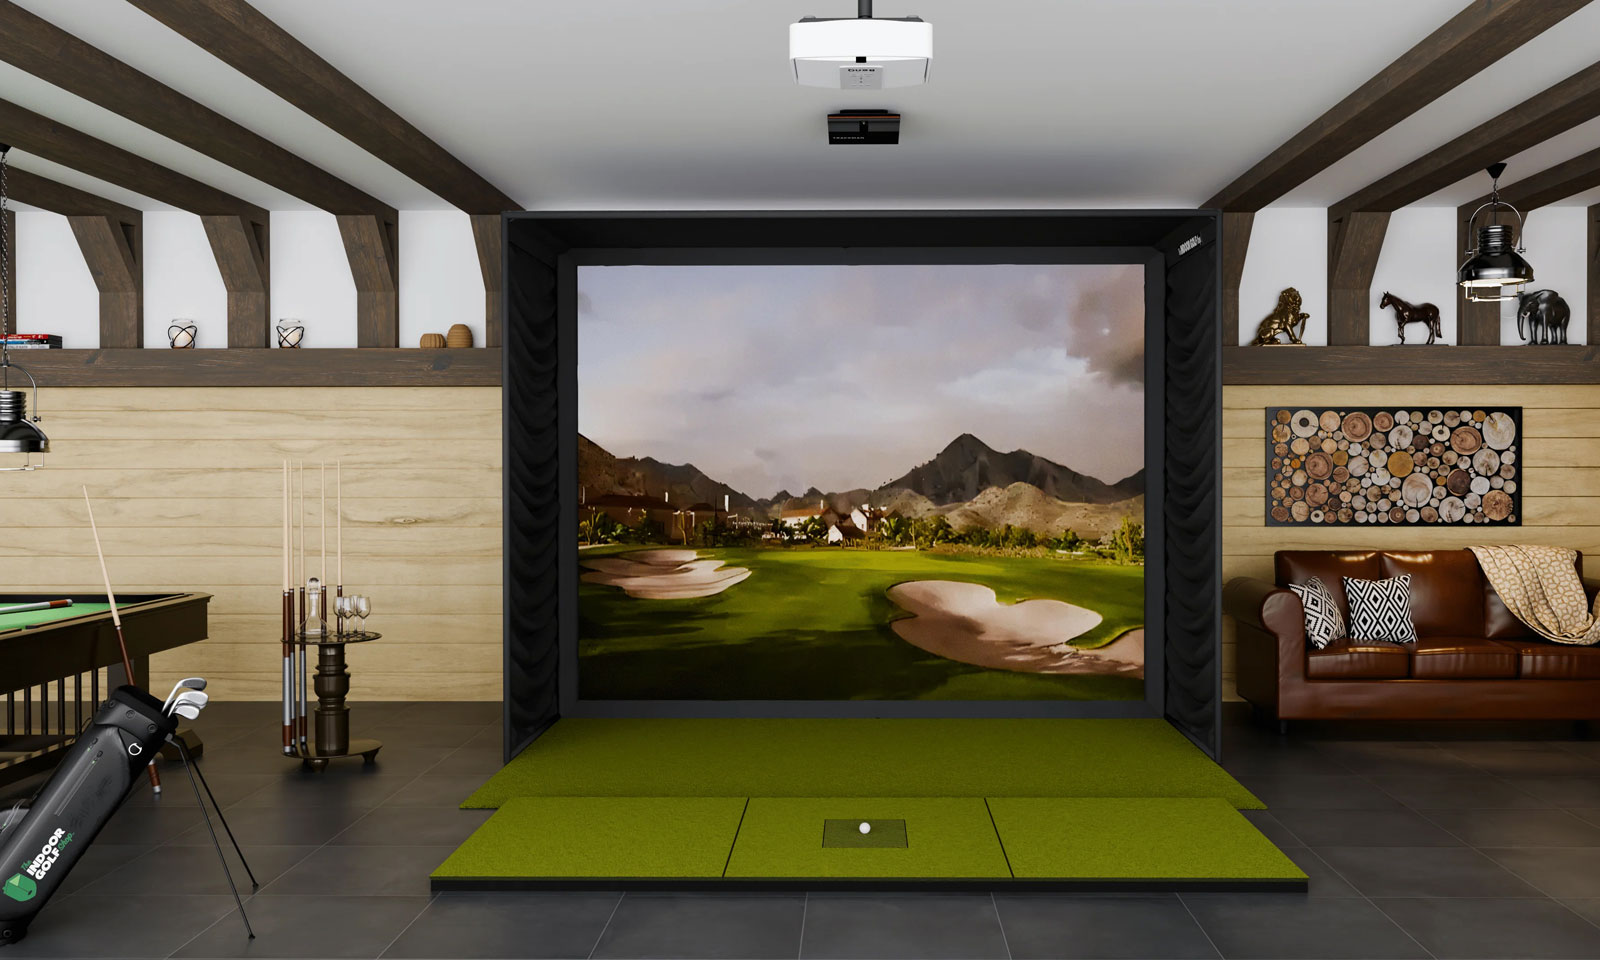 Trackman iO Teams Up with The Indoor Golf Shop to Bring Cutting-Edge Simulation to Your Living Room